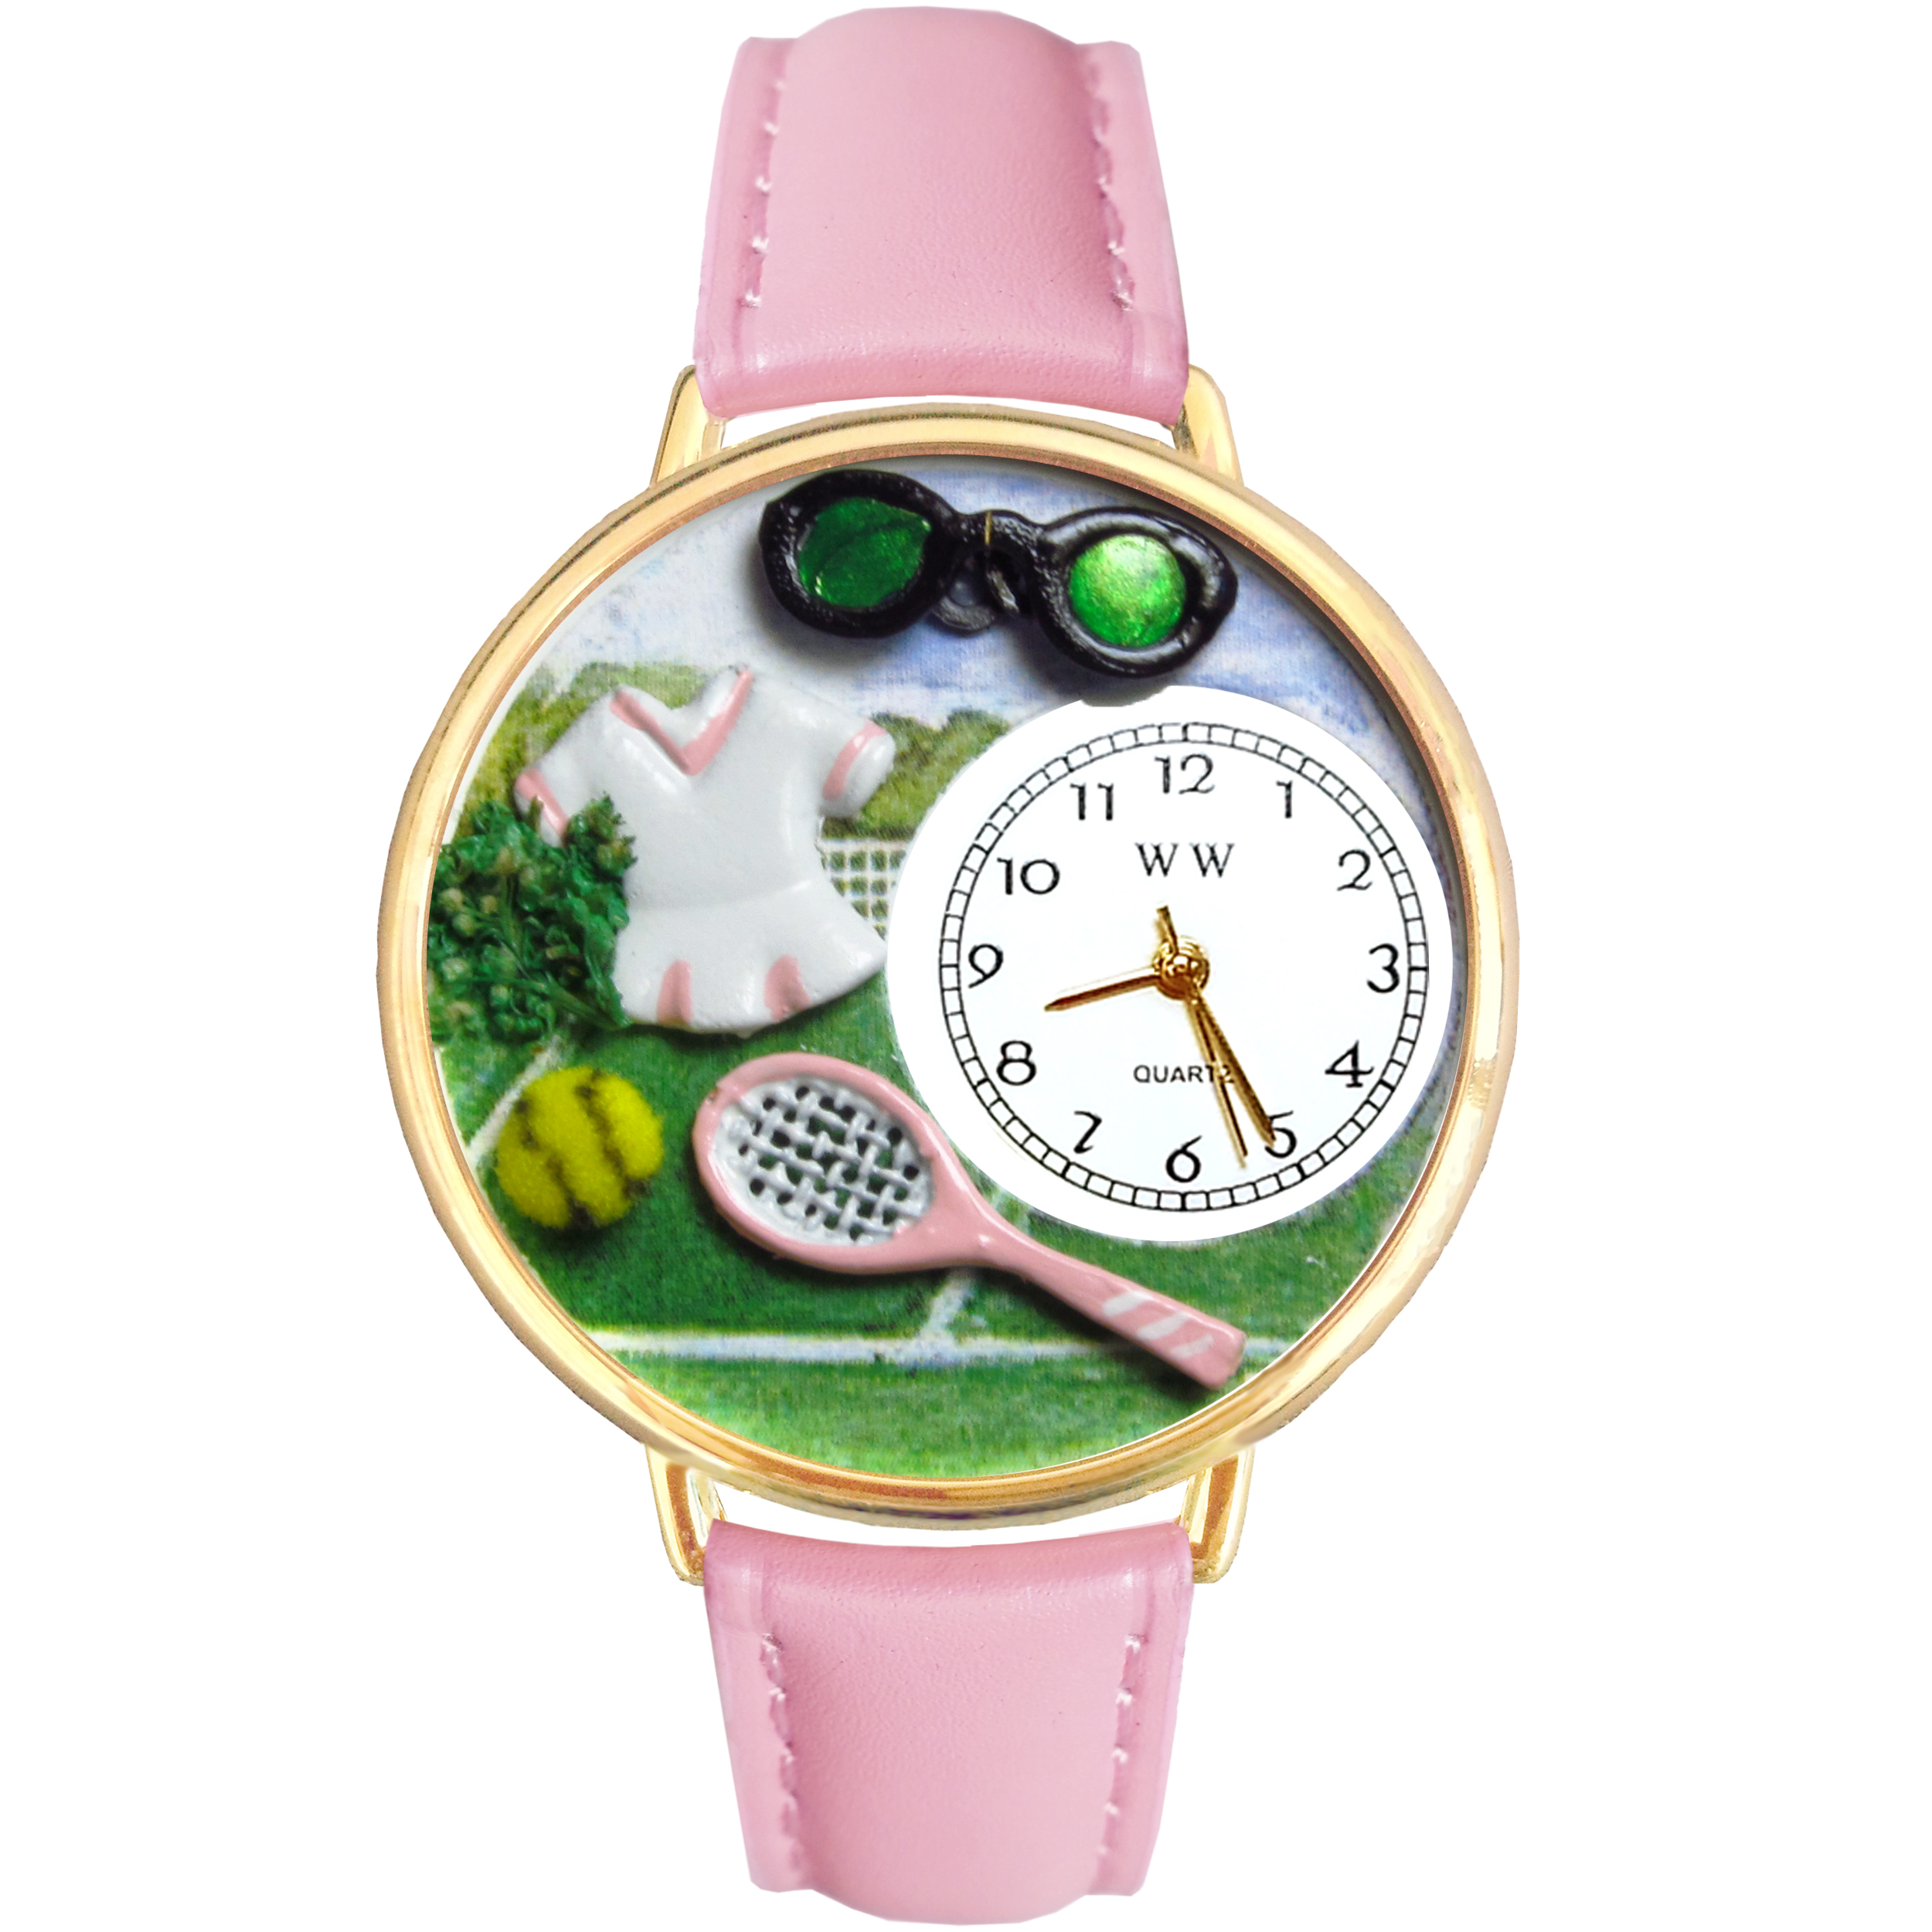 Tennis Watch (Female) in Gold (Large)